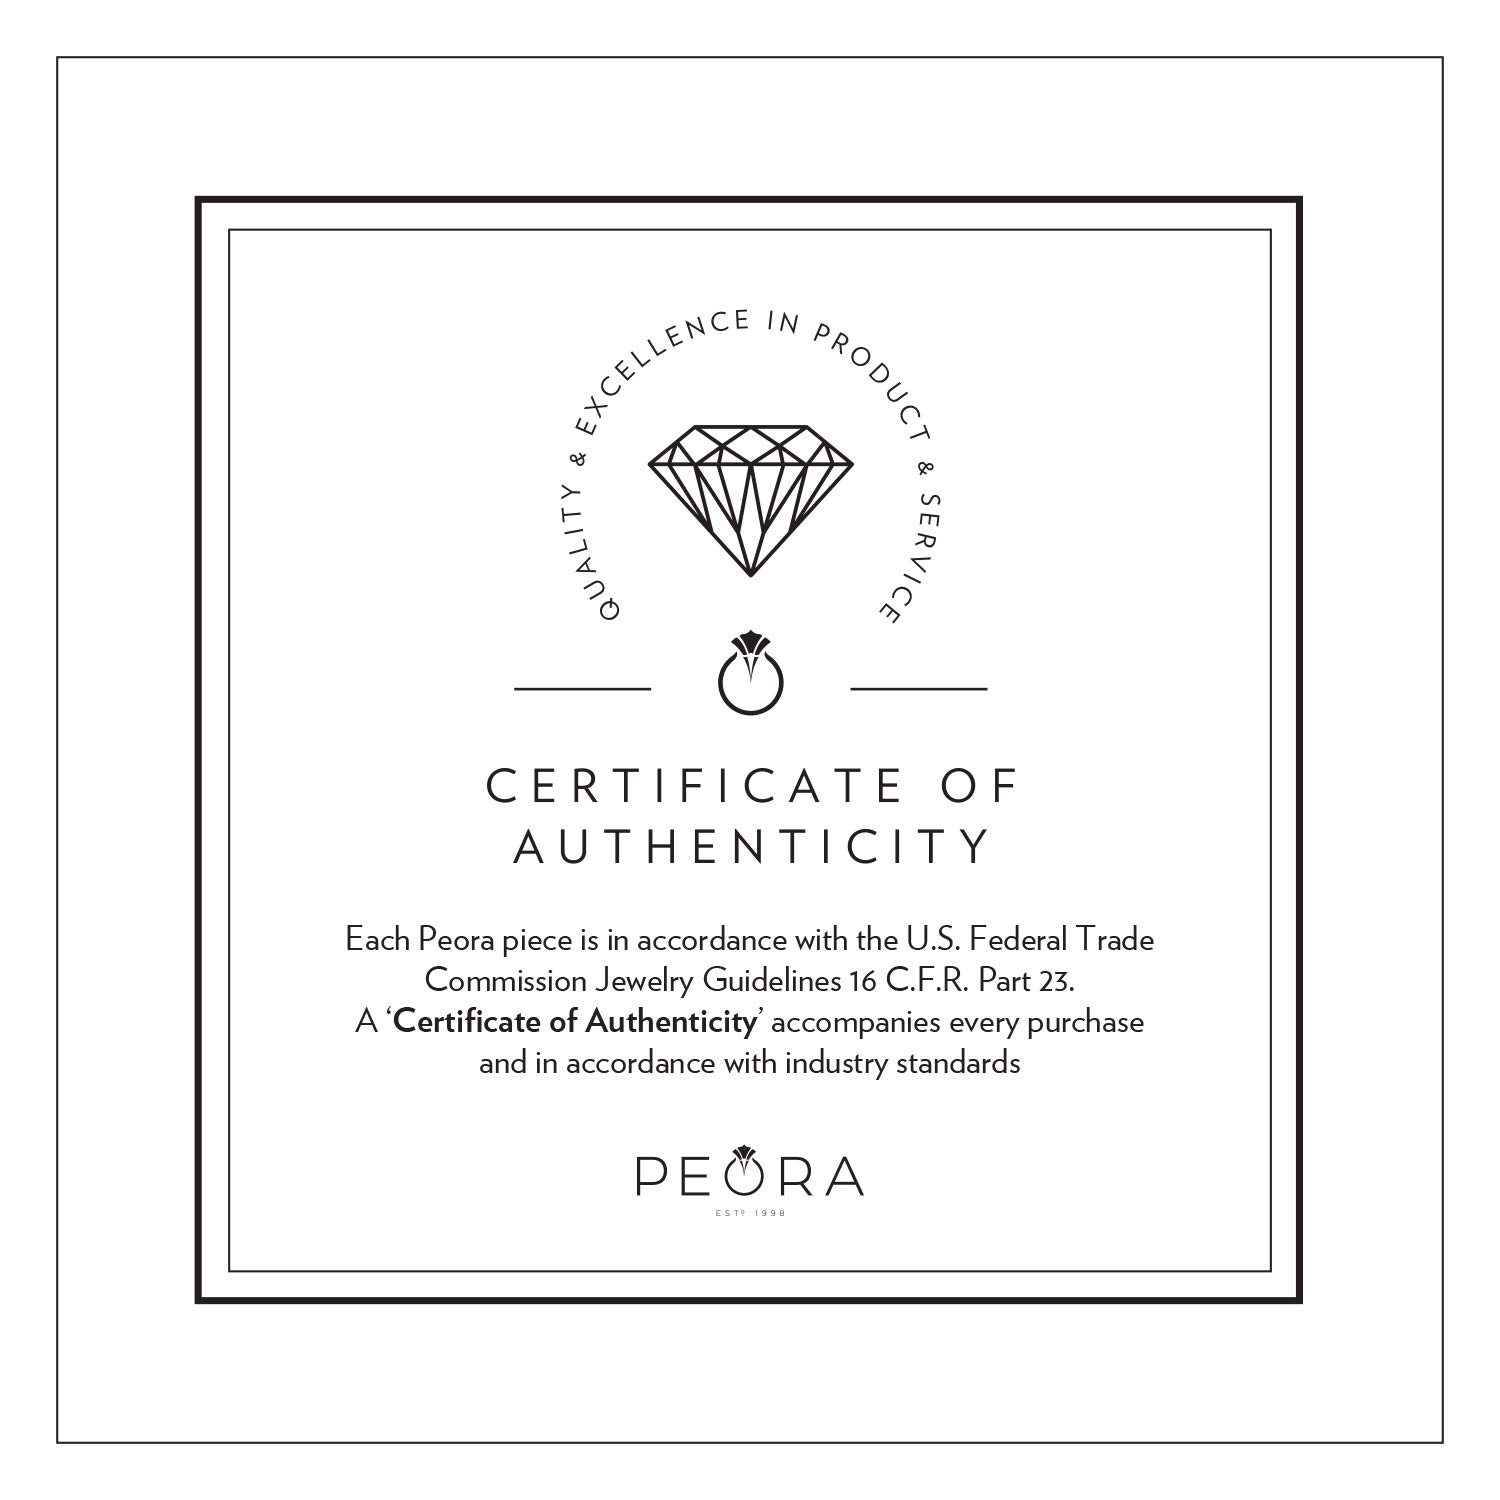 Peora Men's 7mm 14K White Gold Wedding Ring Band, Brushed Matte with Polished Grooves, Comfort Fit Sizes 8 to 16